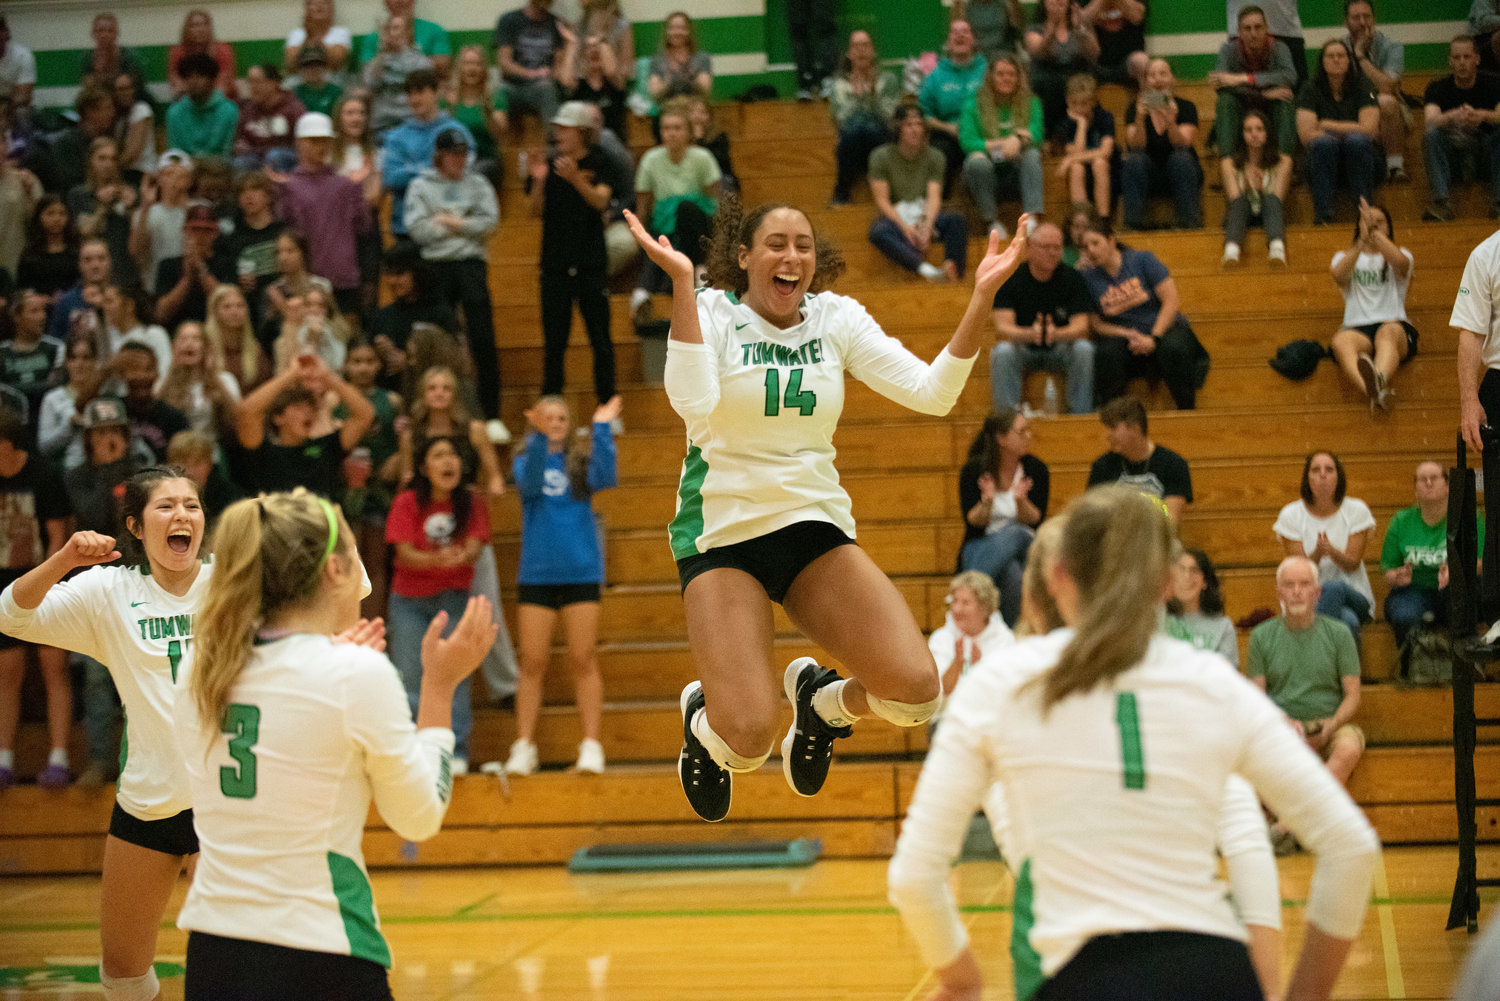 Tumwater senior Isabella Burney jumps up in celebration following a point in the T-Birds' home win over Timberline on Sept. 13.